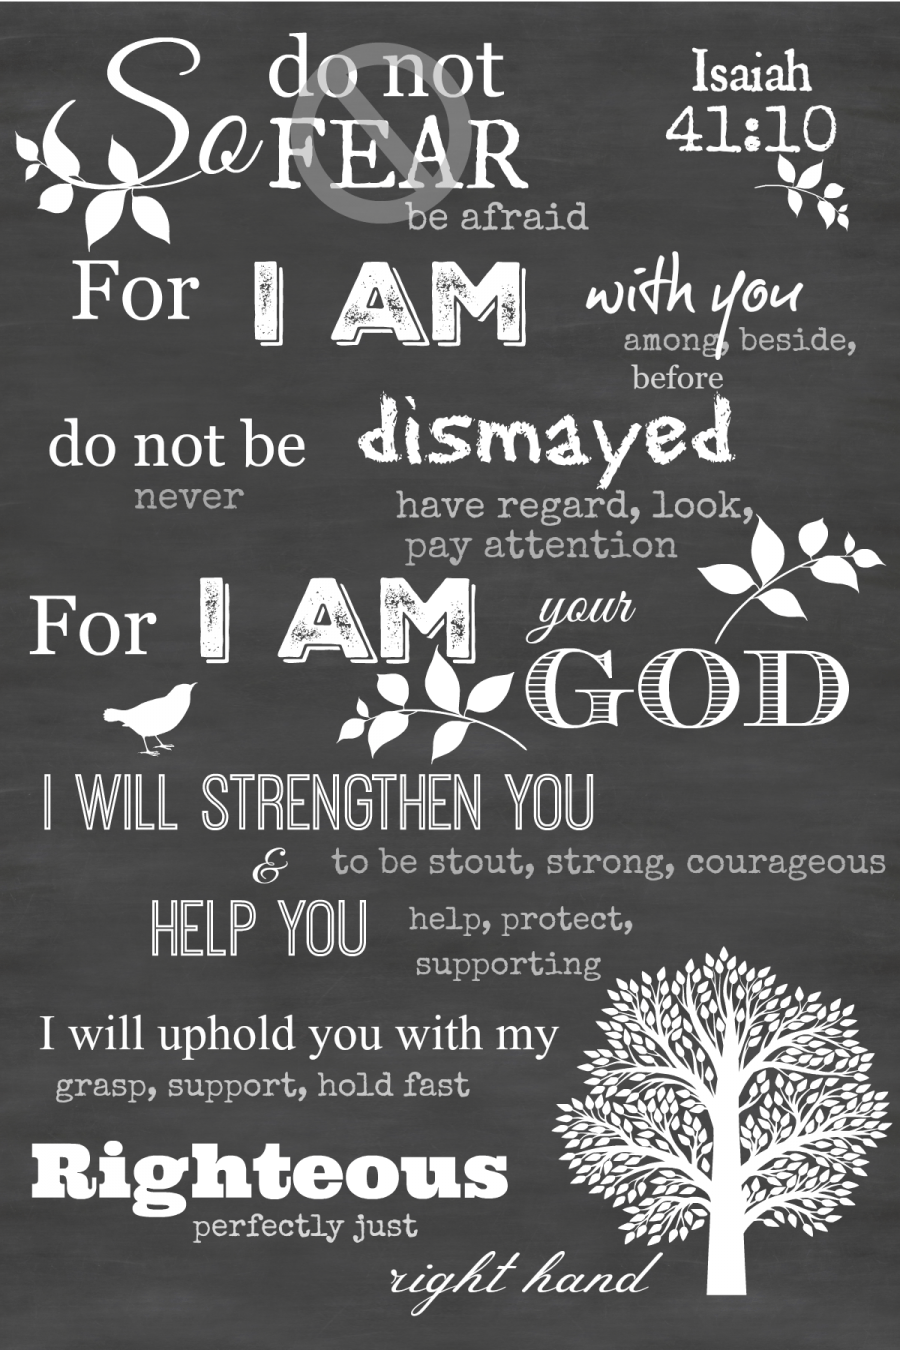 Printable Fear of God Logo - THIS WEEK'S MEMORIZATION VERSE ON A CHALKBOARD PRINTABLE. KITCHEN